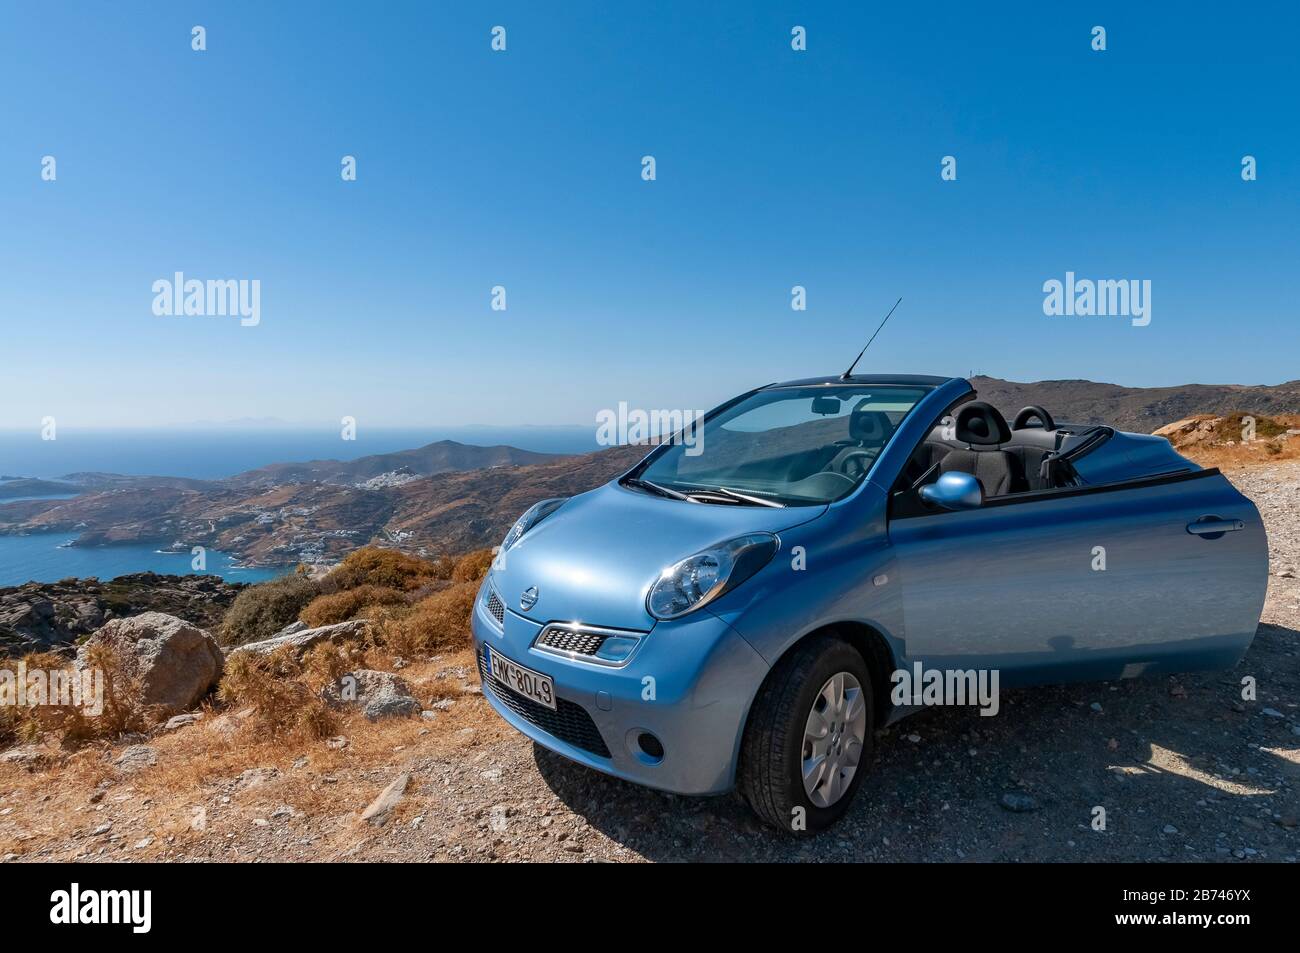 Page 2 - Driving Greece High Resolution Stock Photography and Images - Alamy